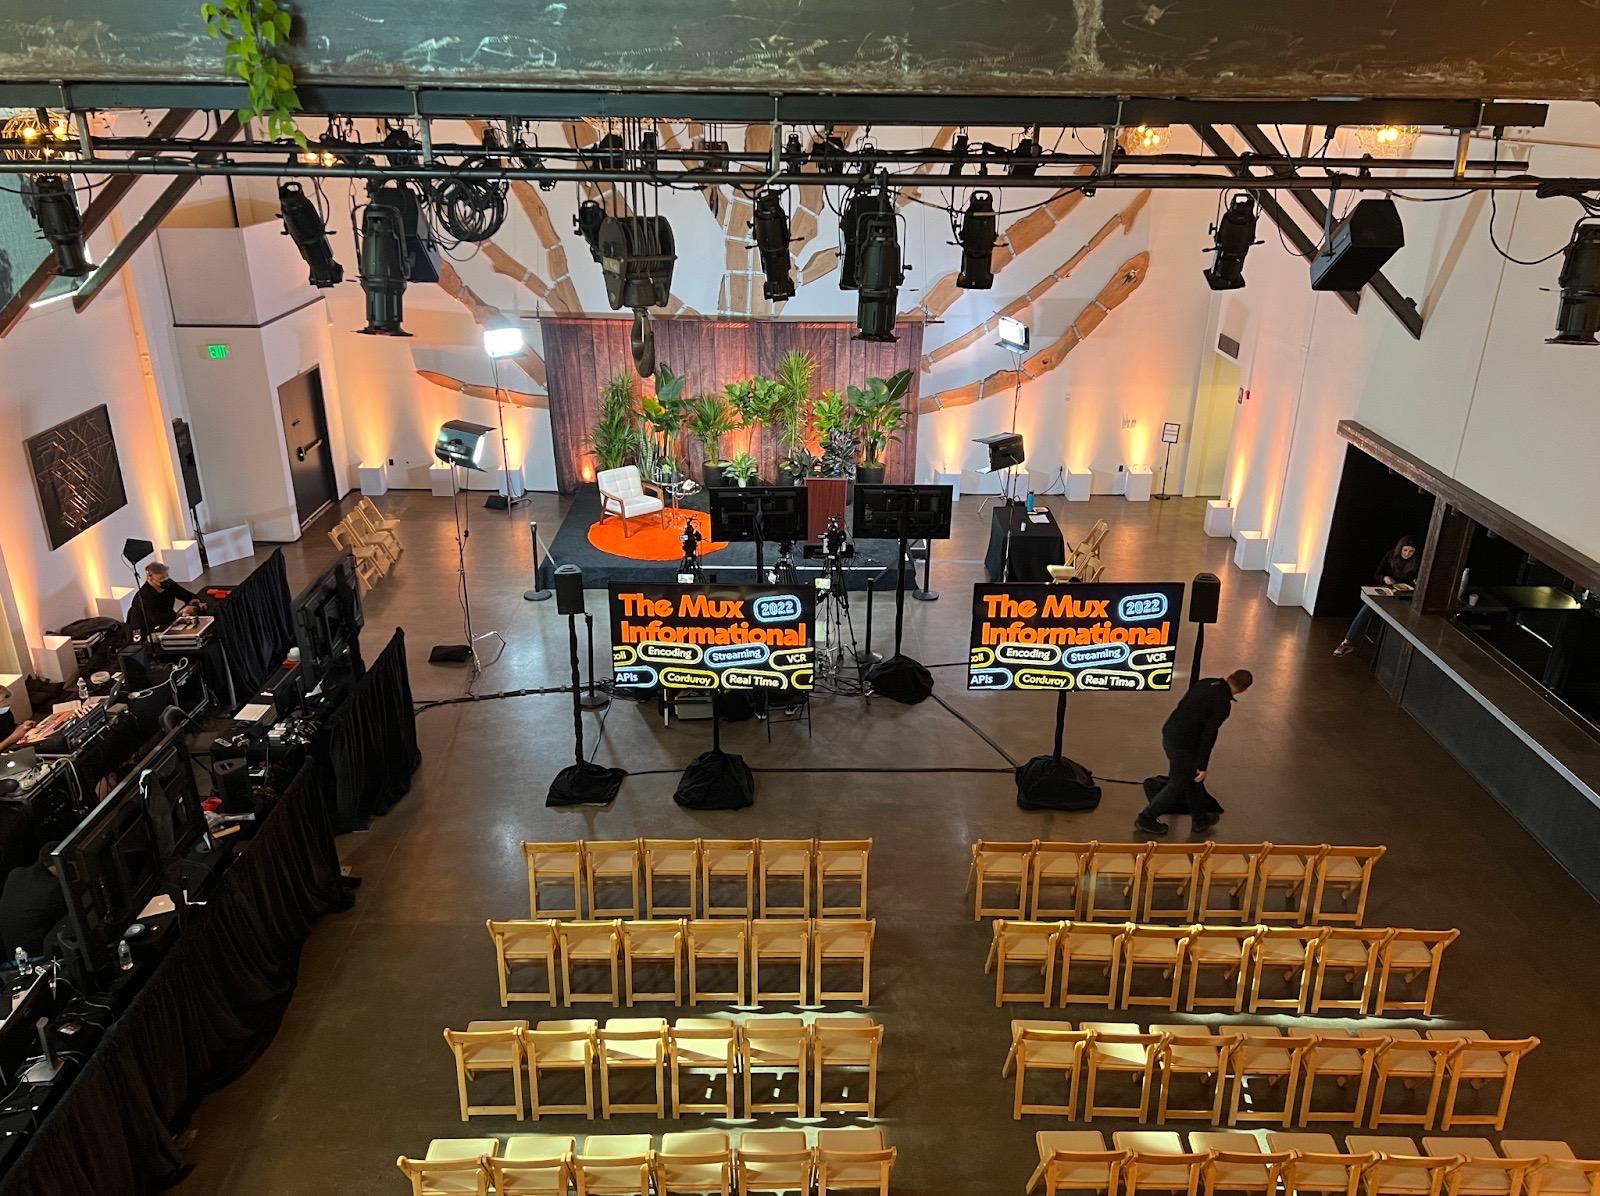 Overhead view of a venue space. On the ground floor, a stage is visible with large monitors in front, multiple rows of wooden chairs in the foreground. Off to the left, long black tables with video monitoring equipment. Overhead lights are visible.